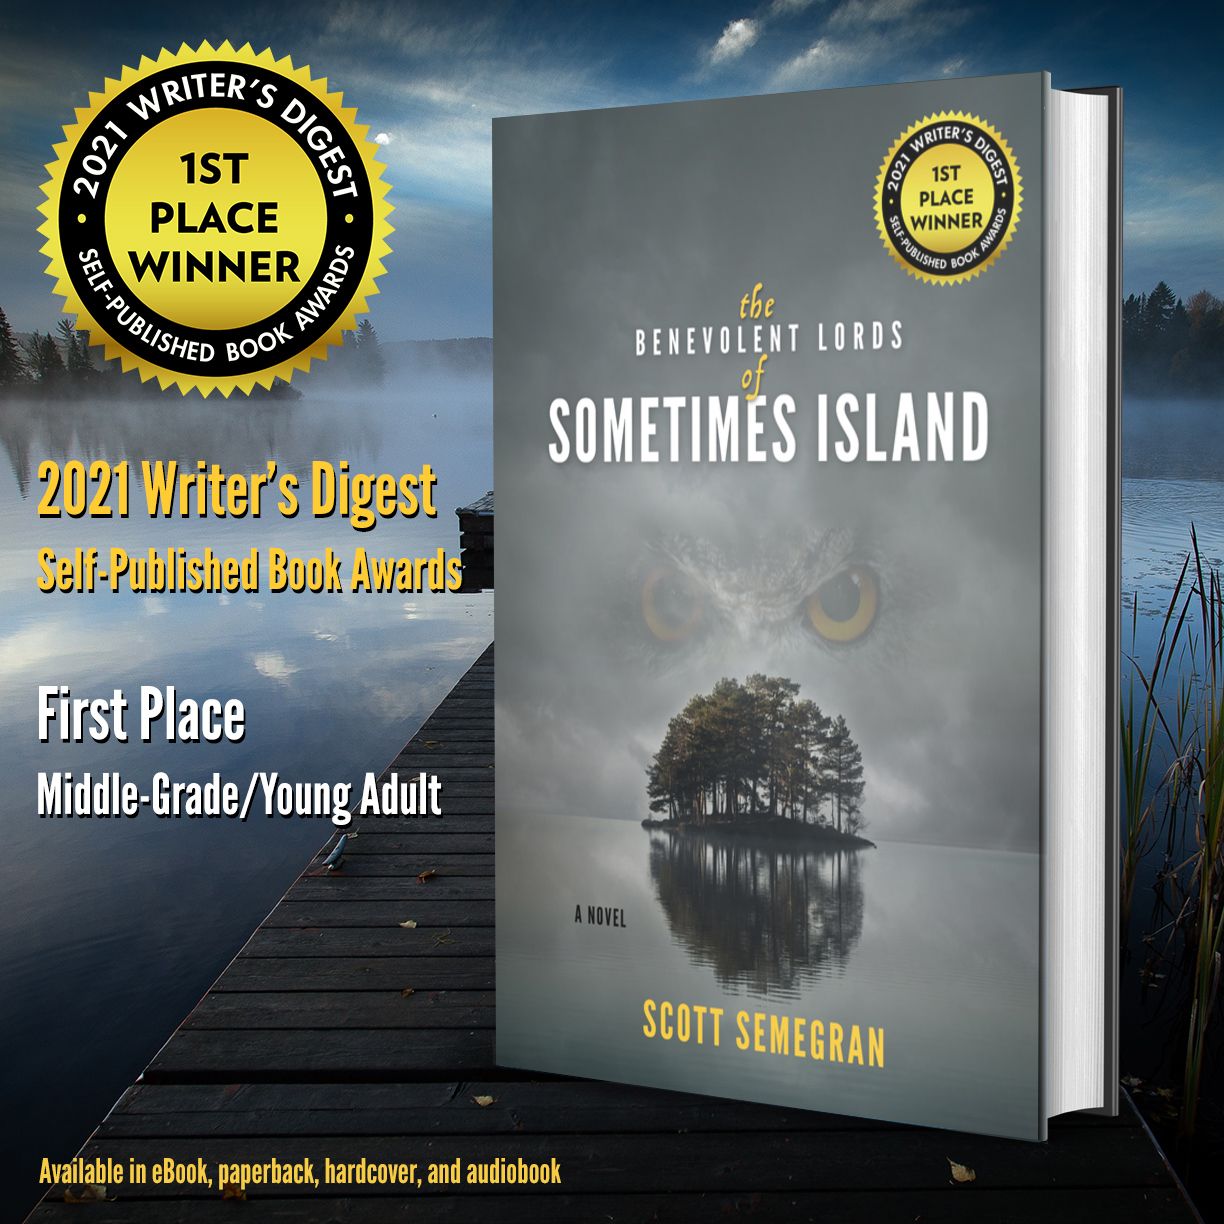 THE BENEVOLENT LORDS OF SOMETIMES ISLAND is the First Place Winner for Middle-Grade/Young Adult Novel in the 2021 Writer’s Digest Self-Published Book Awards